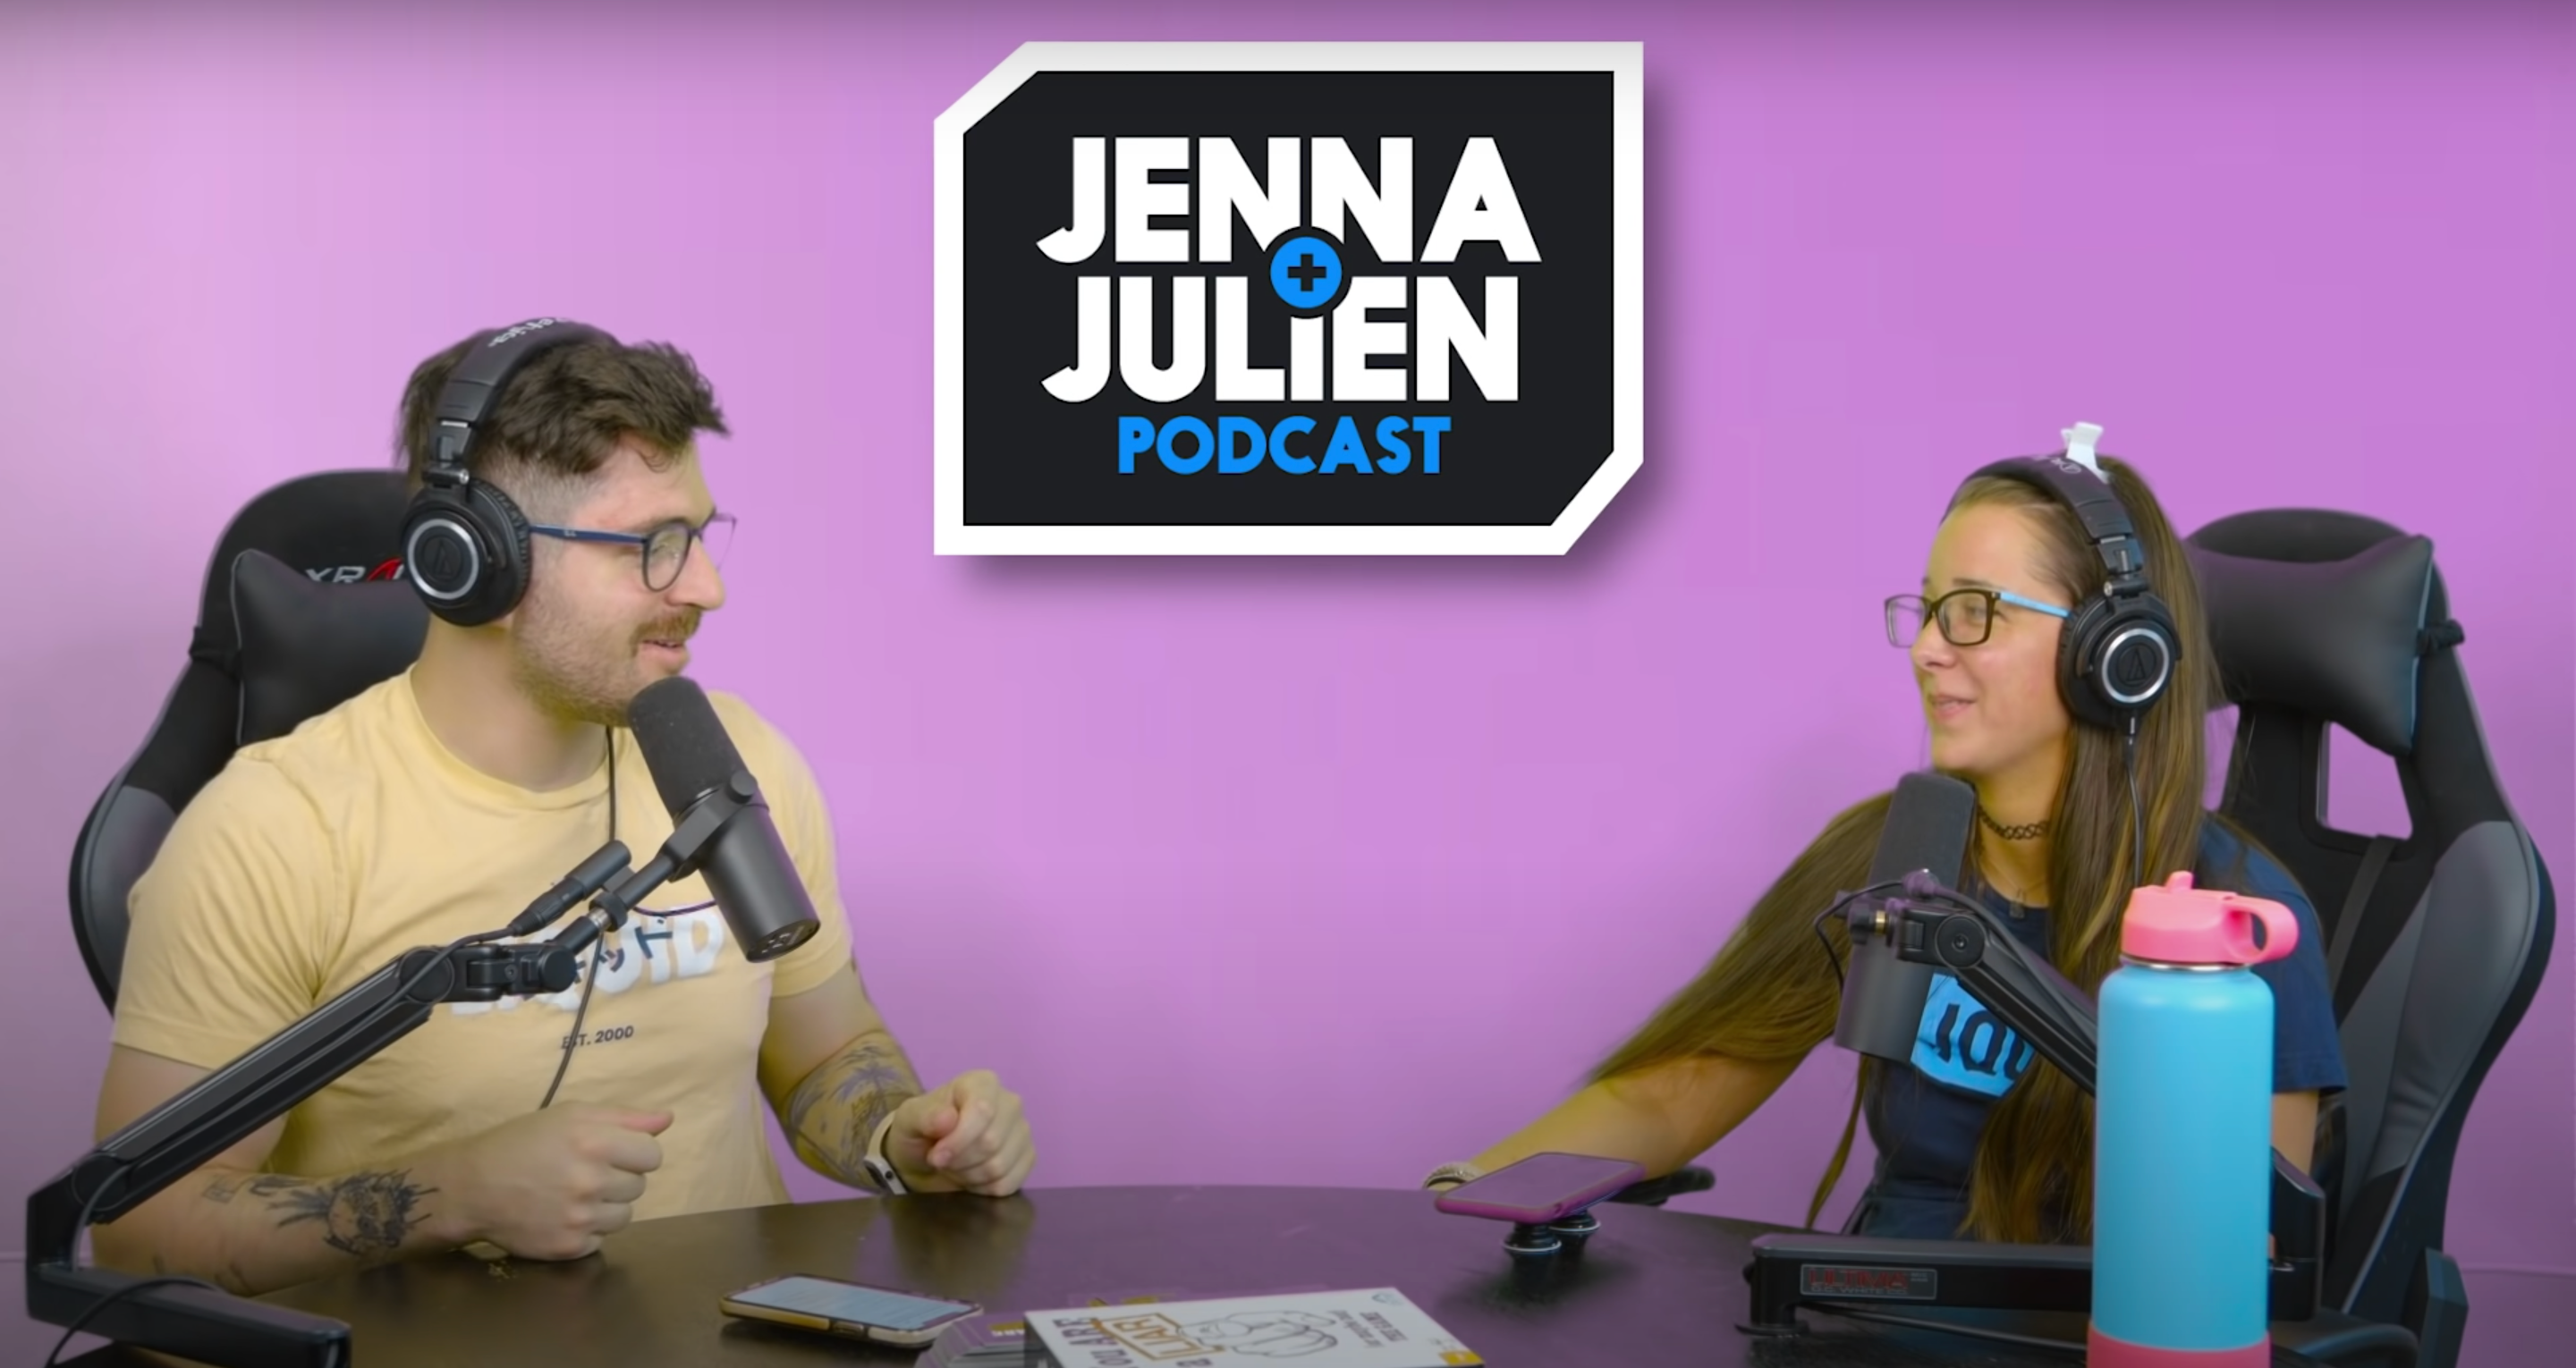 Jenna Marbles Returns to the Internet to End the 'Jenna Julien' Podcast